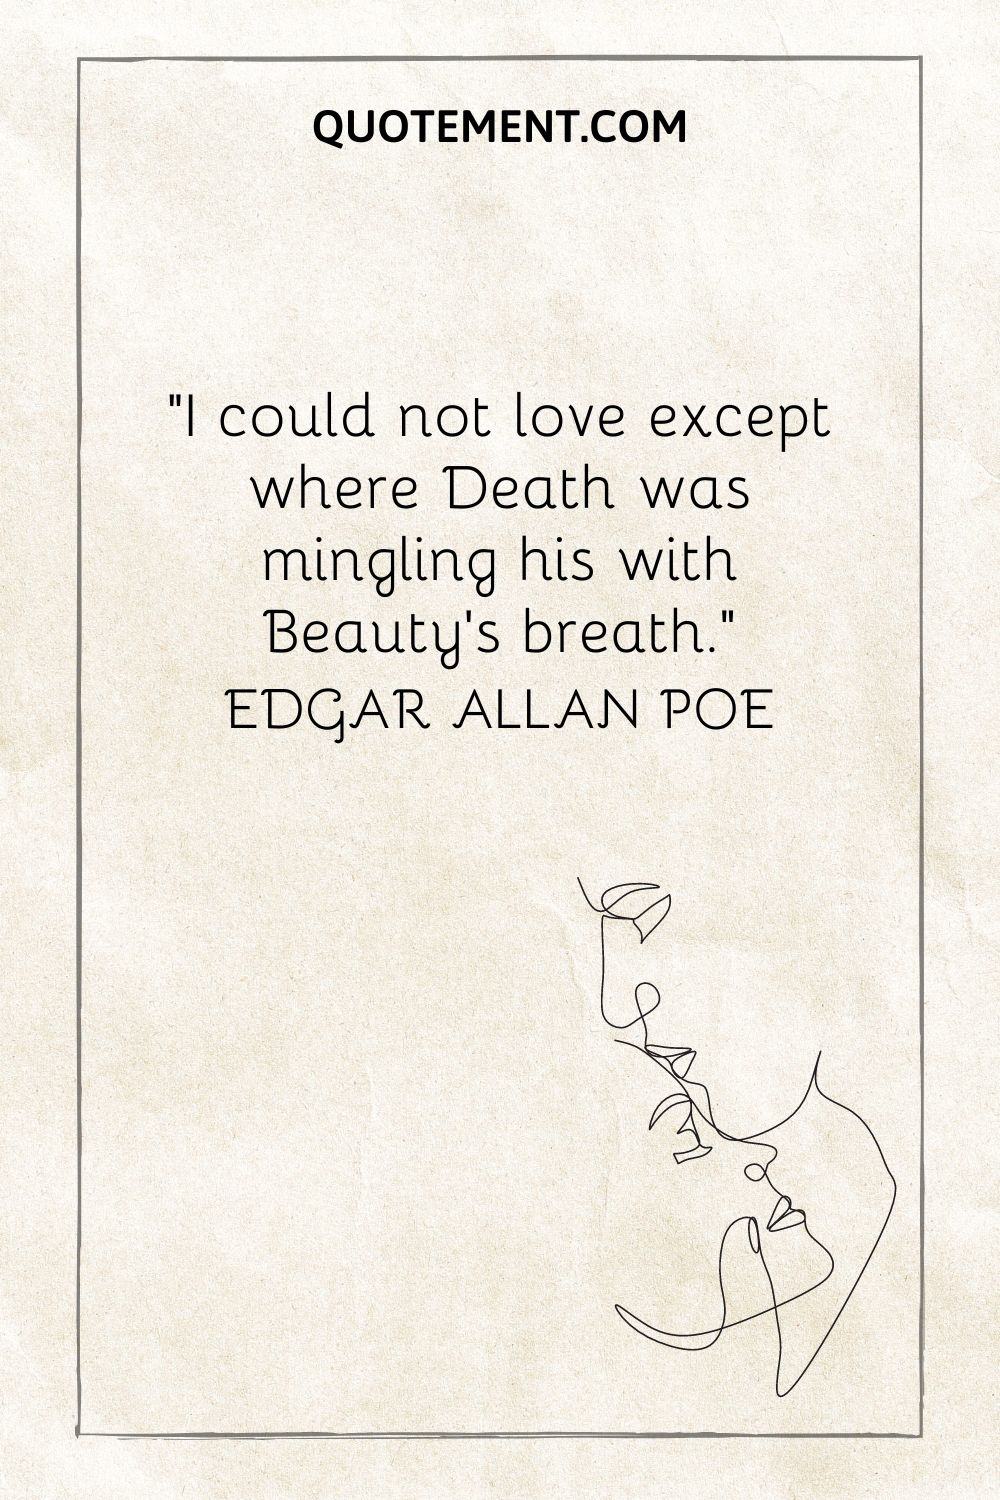 “I could not love except where Death was mingling his with Beauty's breath.” — Edgar Allan Poe